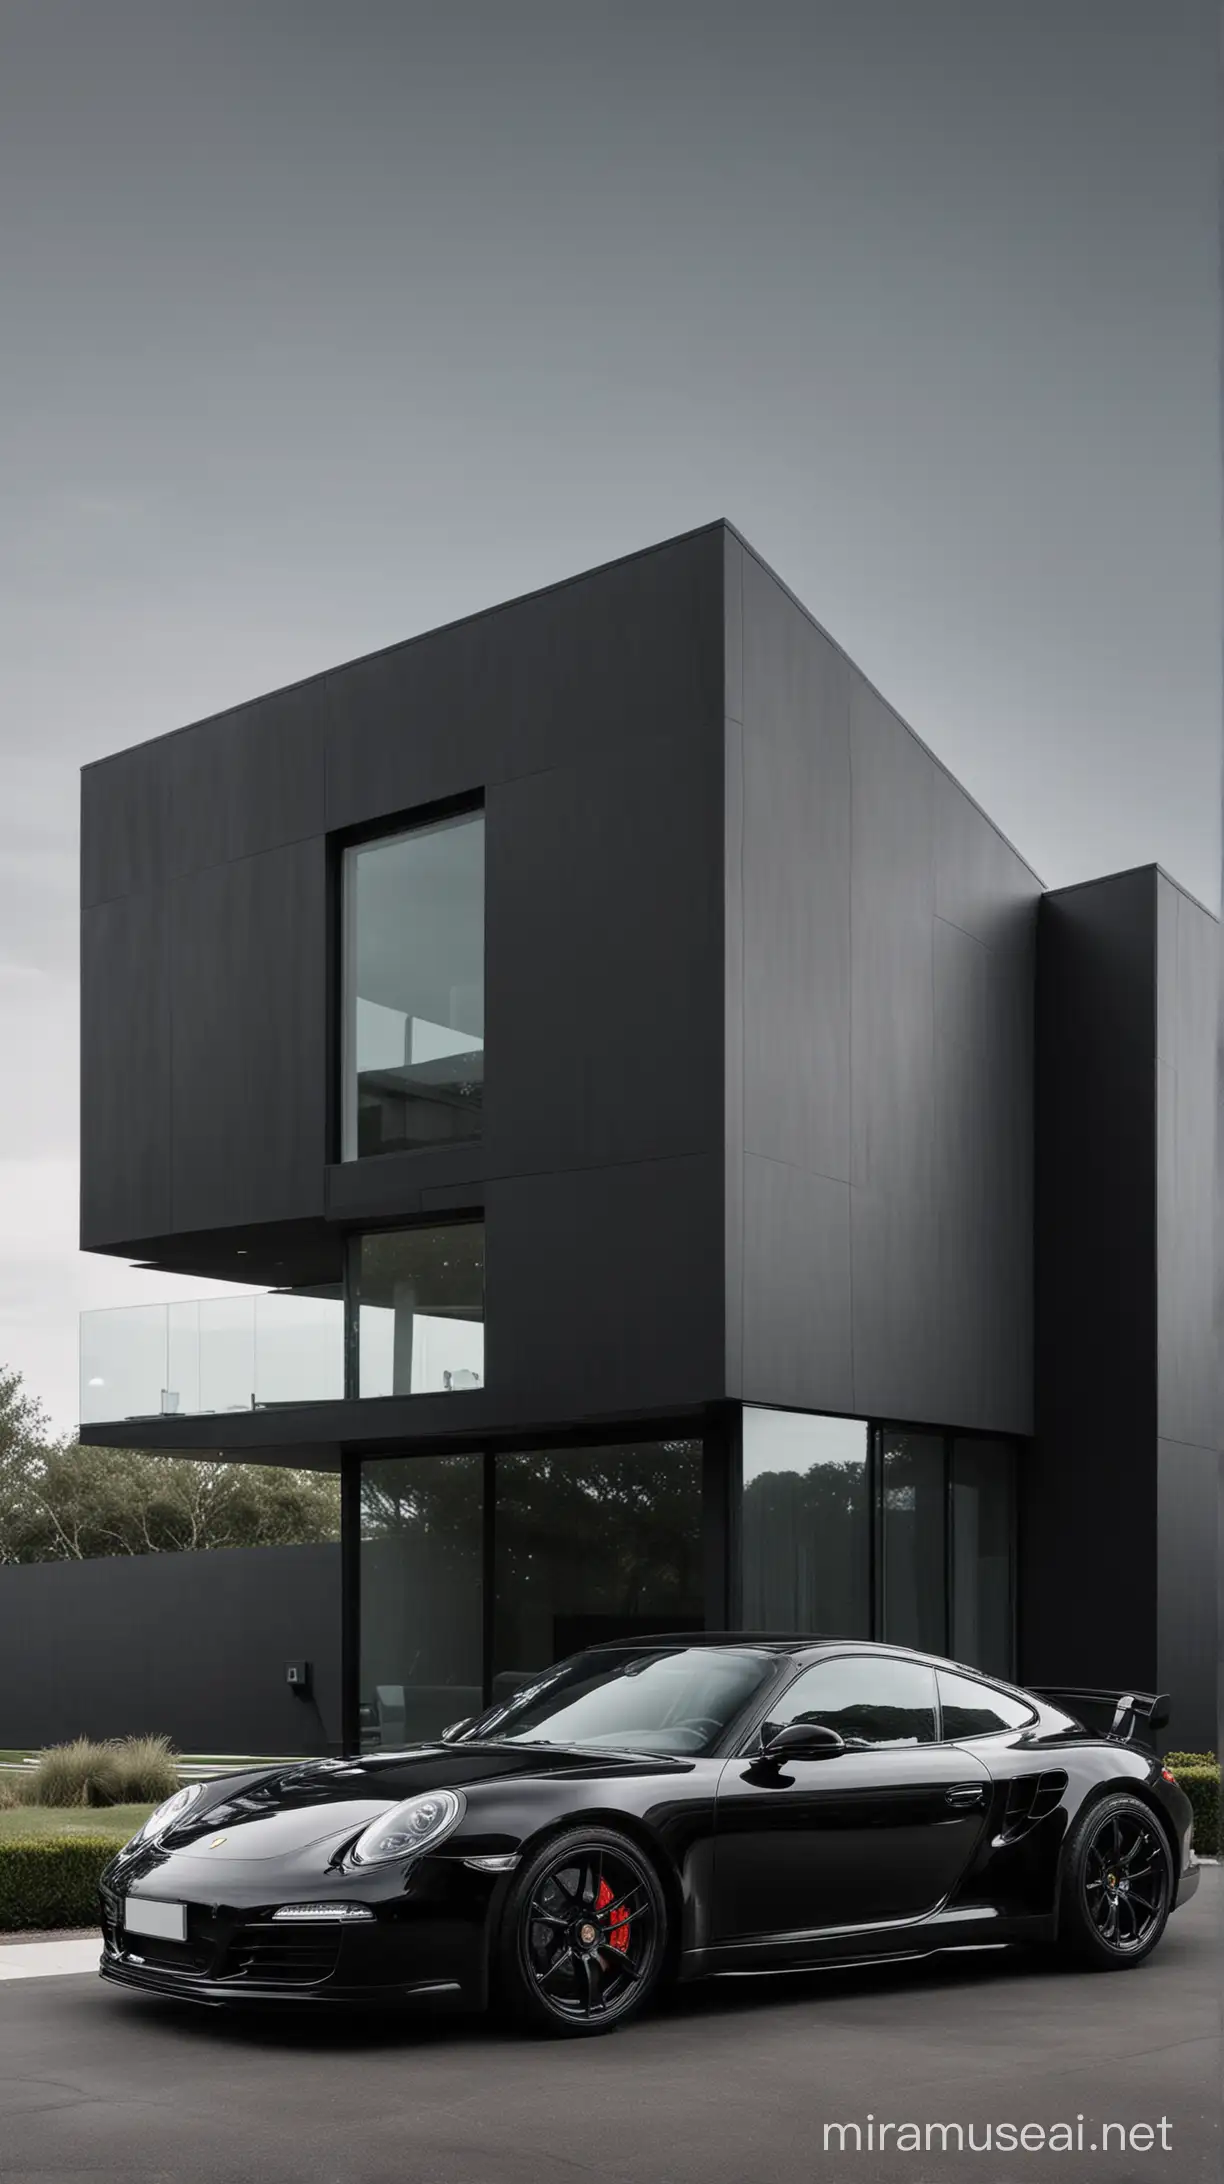 Give me a black Porsche in a  
minimalist black house with glass Windows